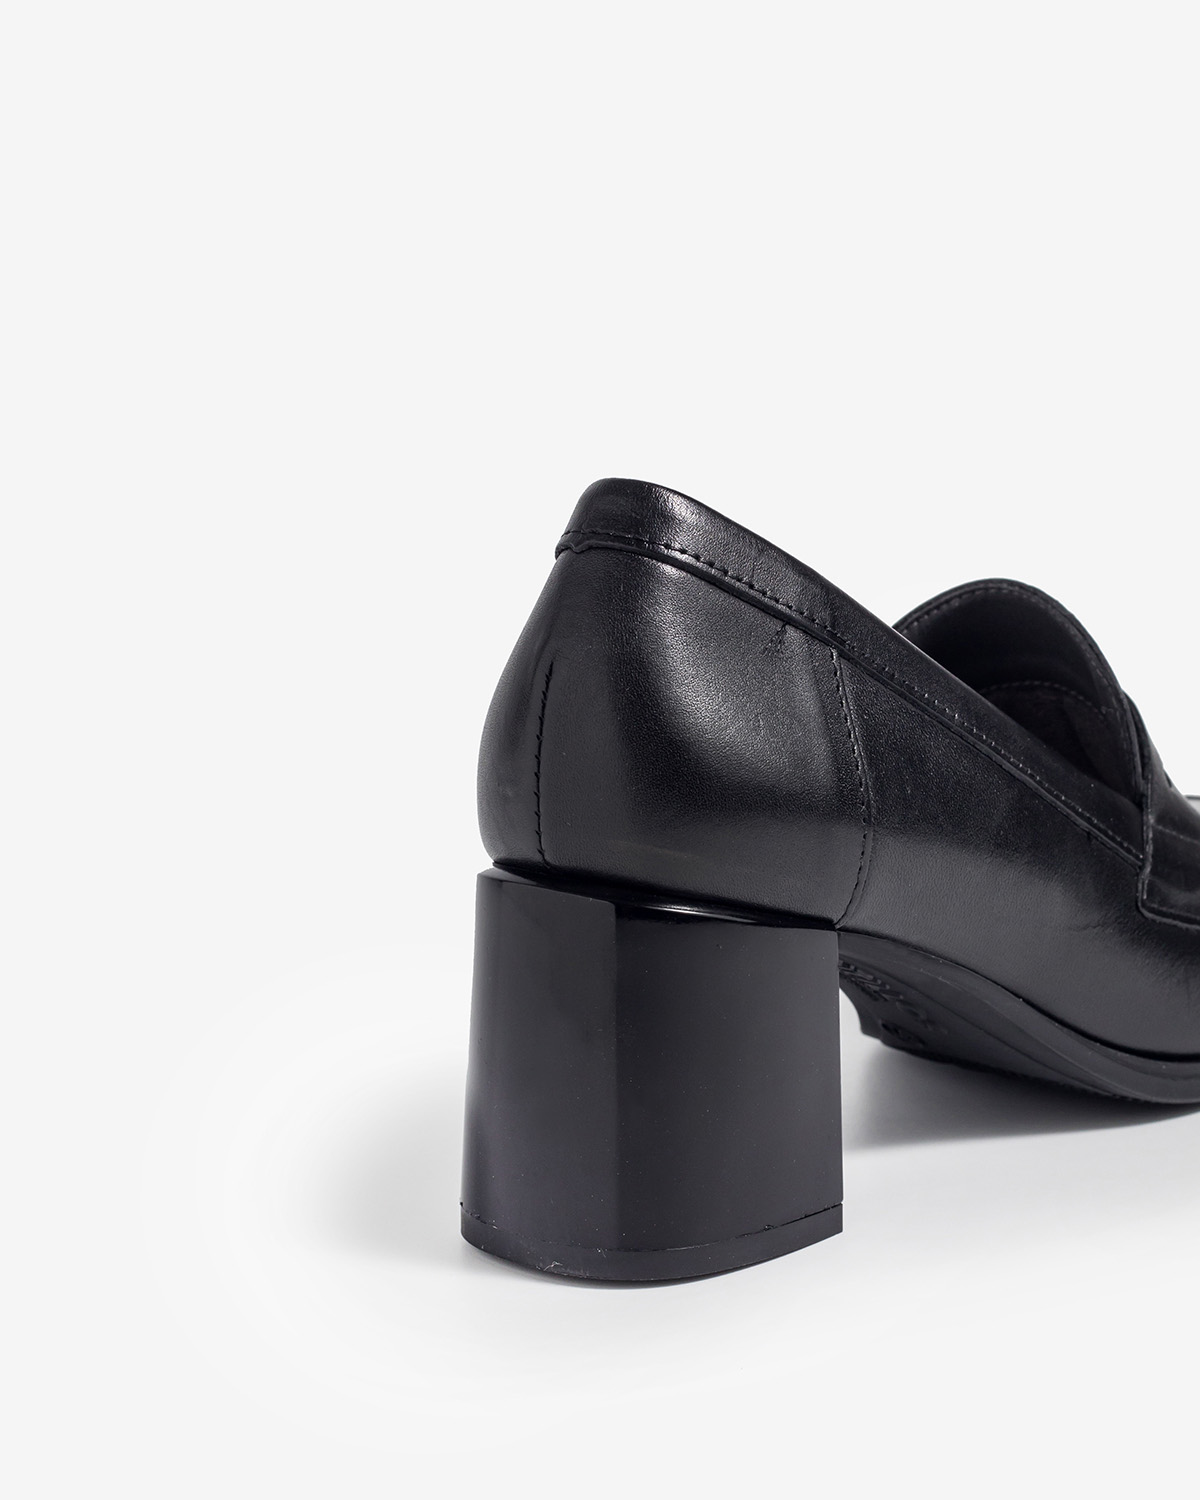 PITILLOS loafers in black leather | Moustakis Shoes | Shoes for Women & Men